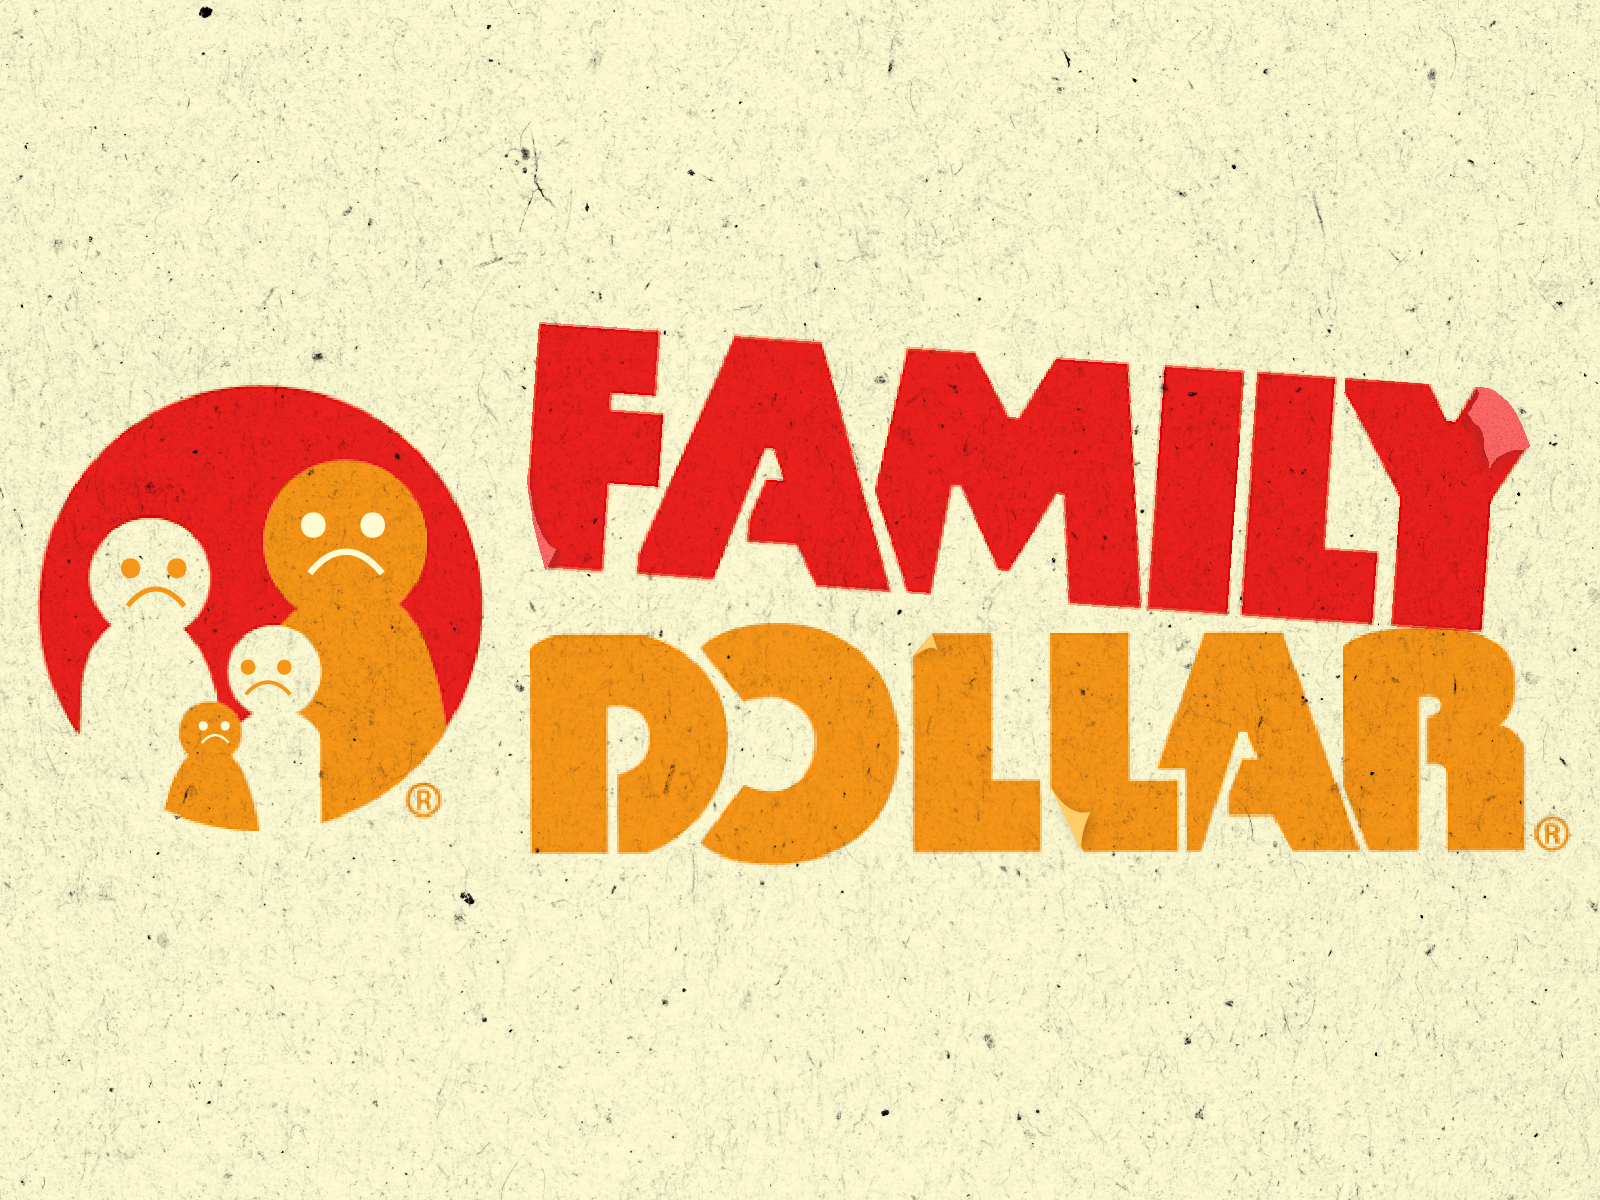 A distressed version of the Family Dollar logo, with peeling edges and sad faces on the icons'